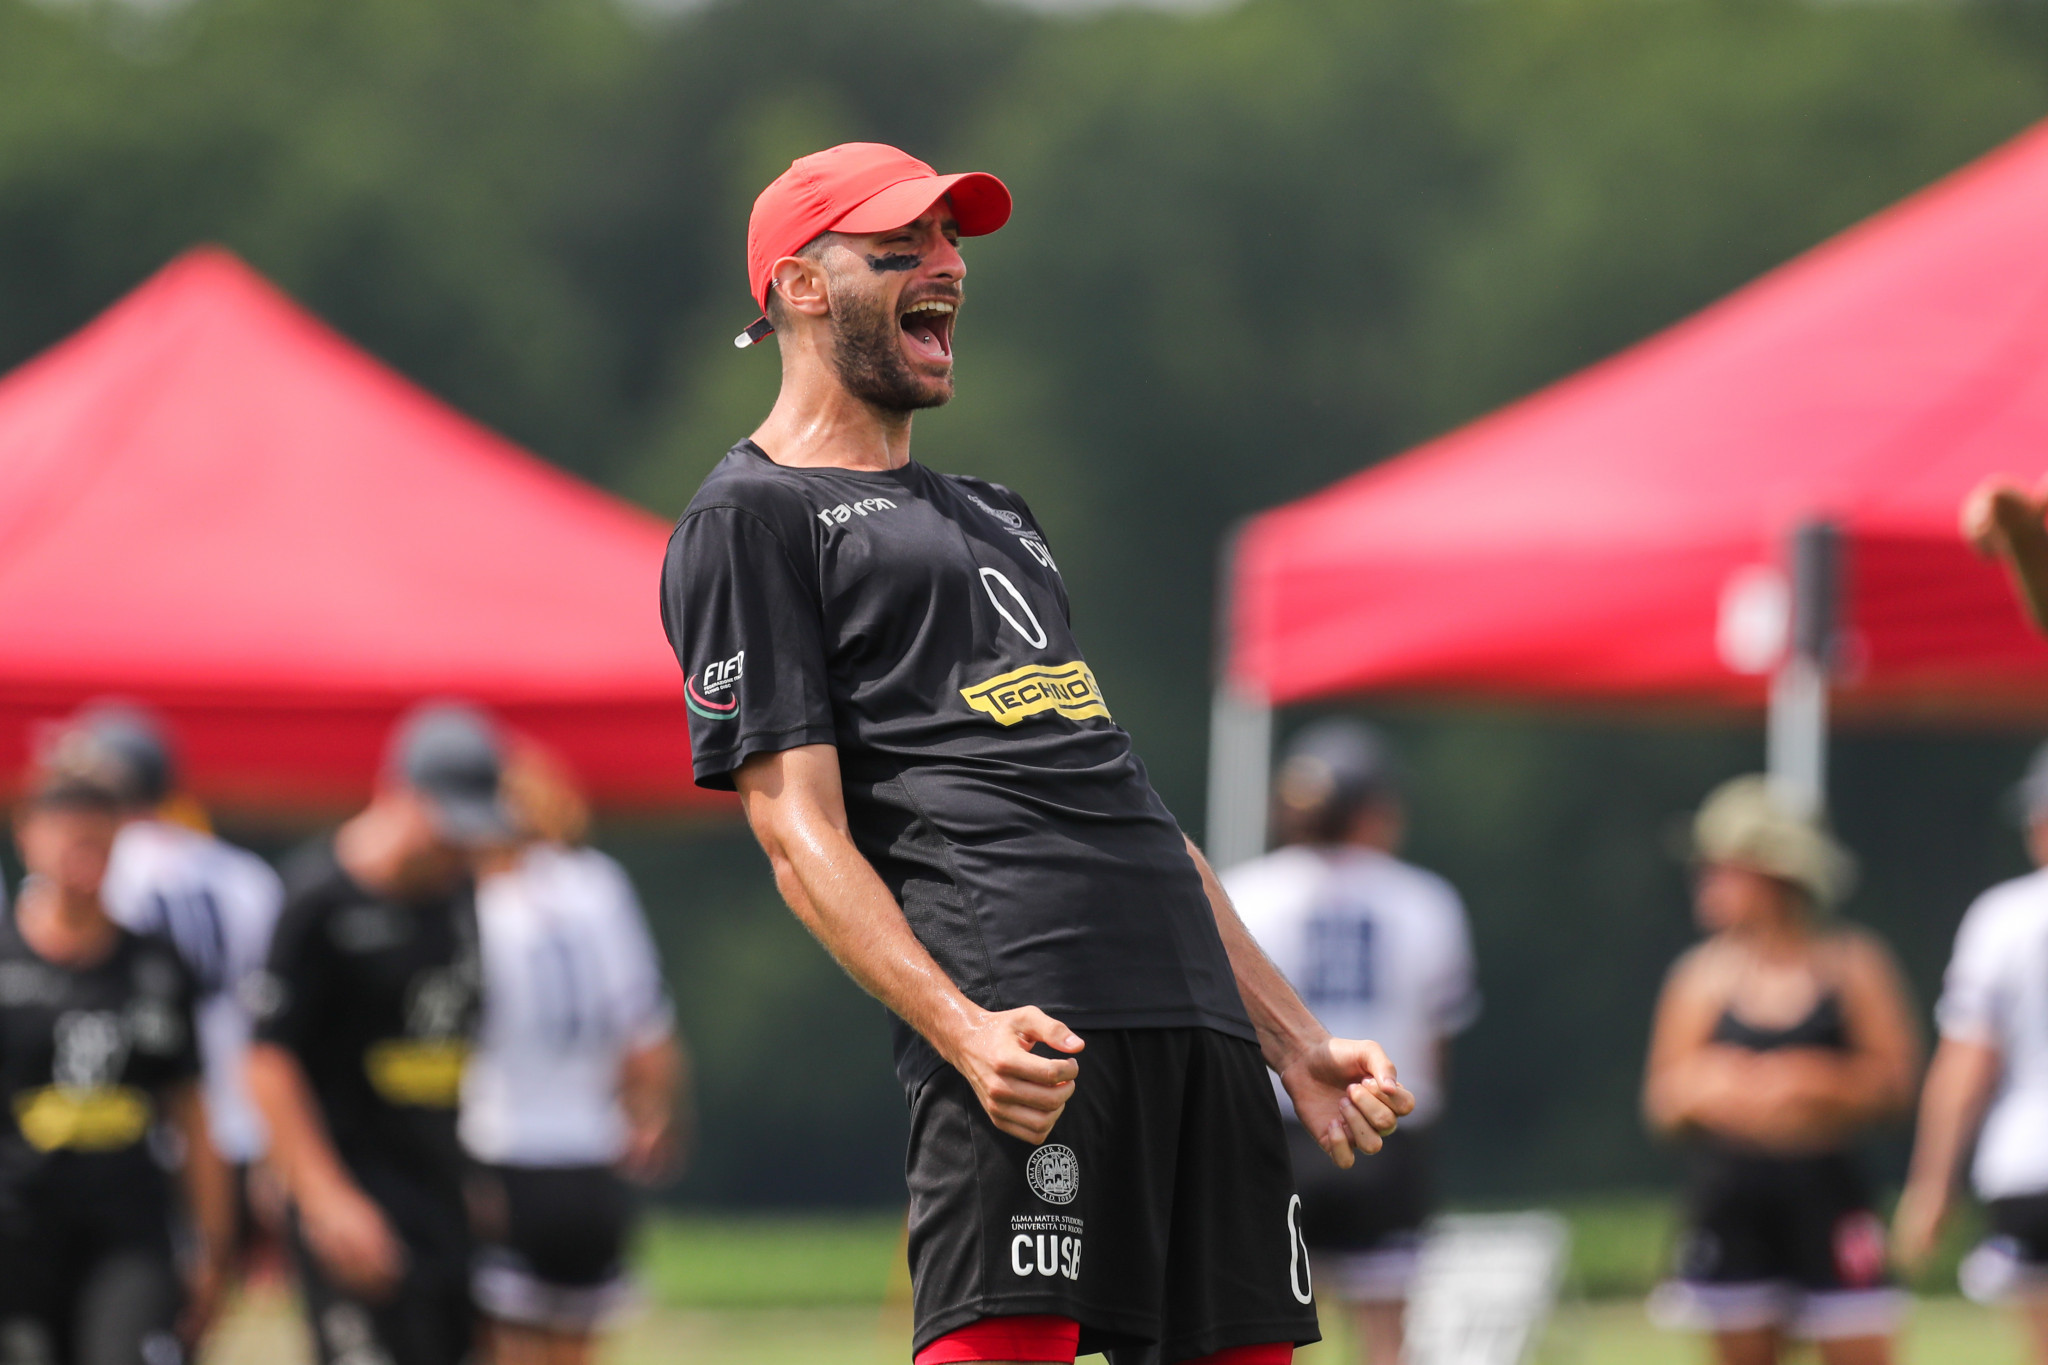 CUSB Red Shot's Jacopo Rizzo celebrated their triumph over Crazy Dog ©Paul Rutherford for UltiPhotos